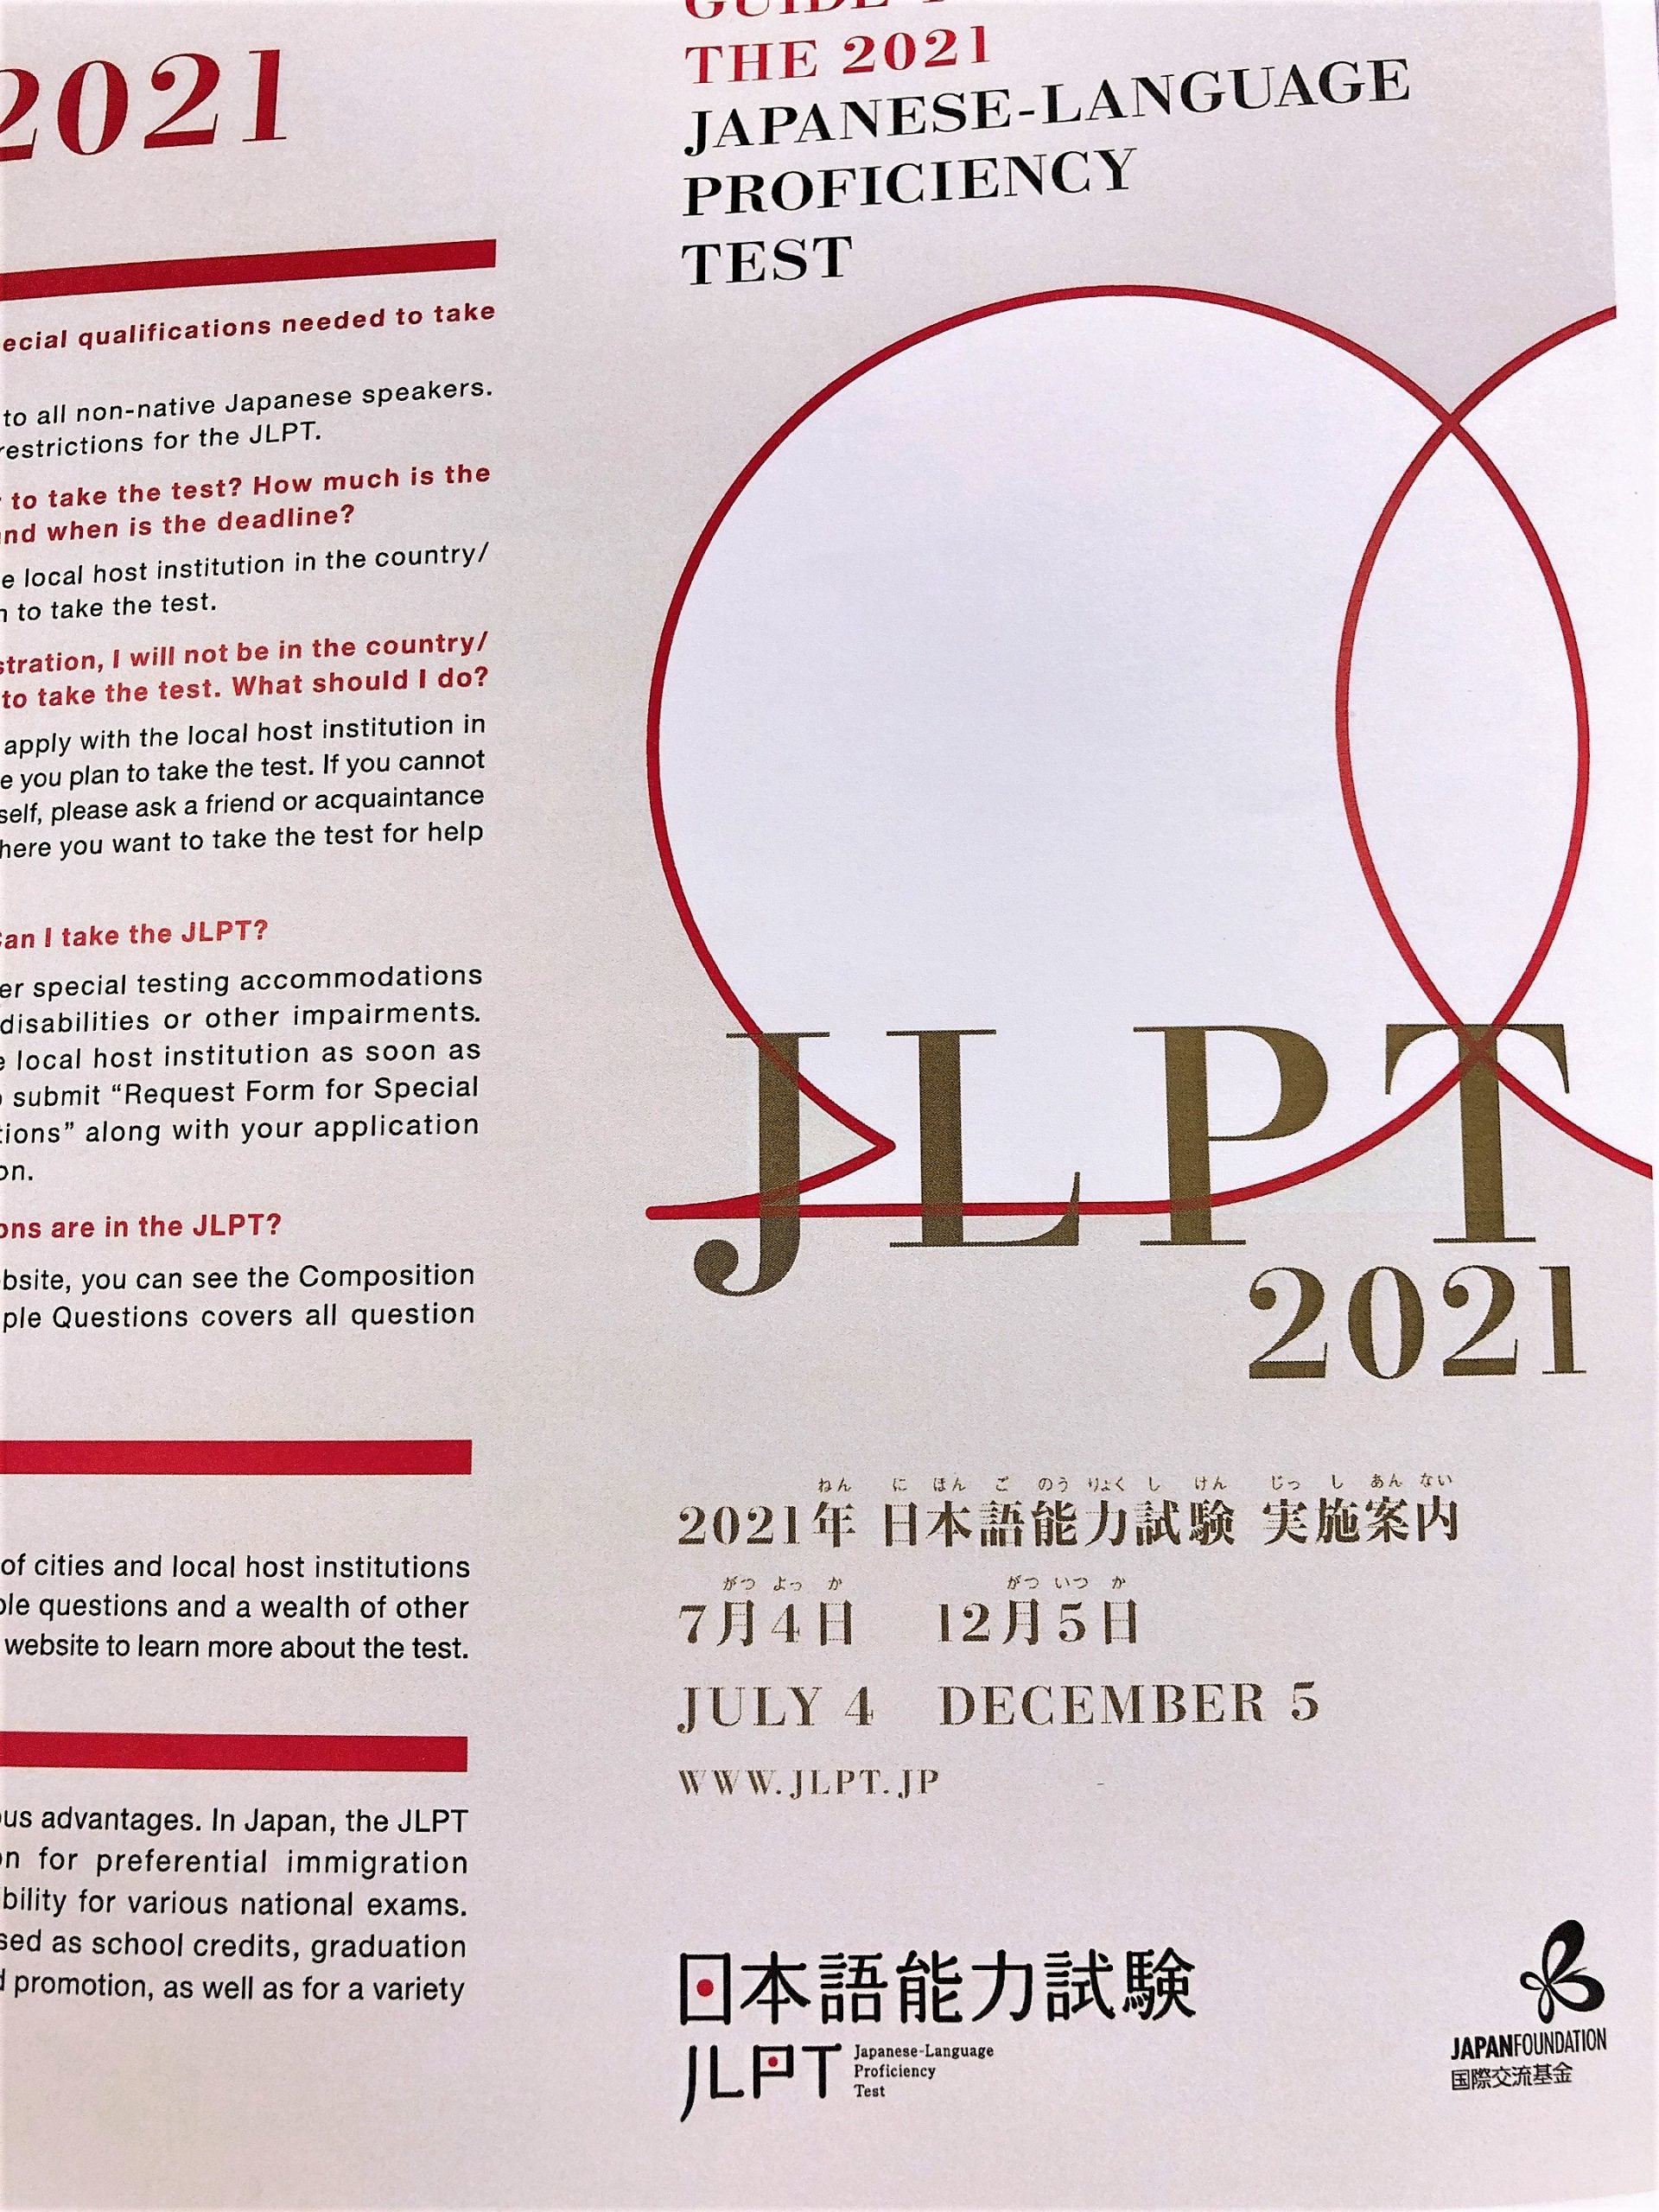 The 1st JLPT in 2021 application